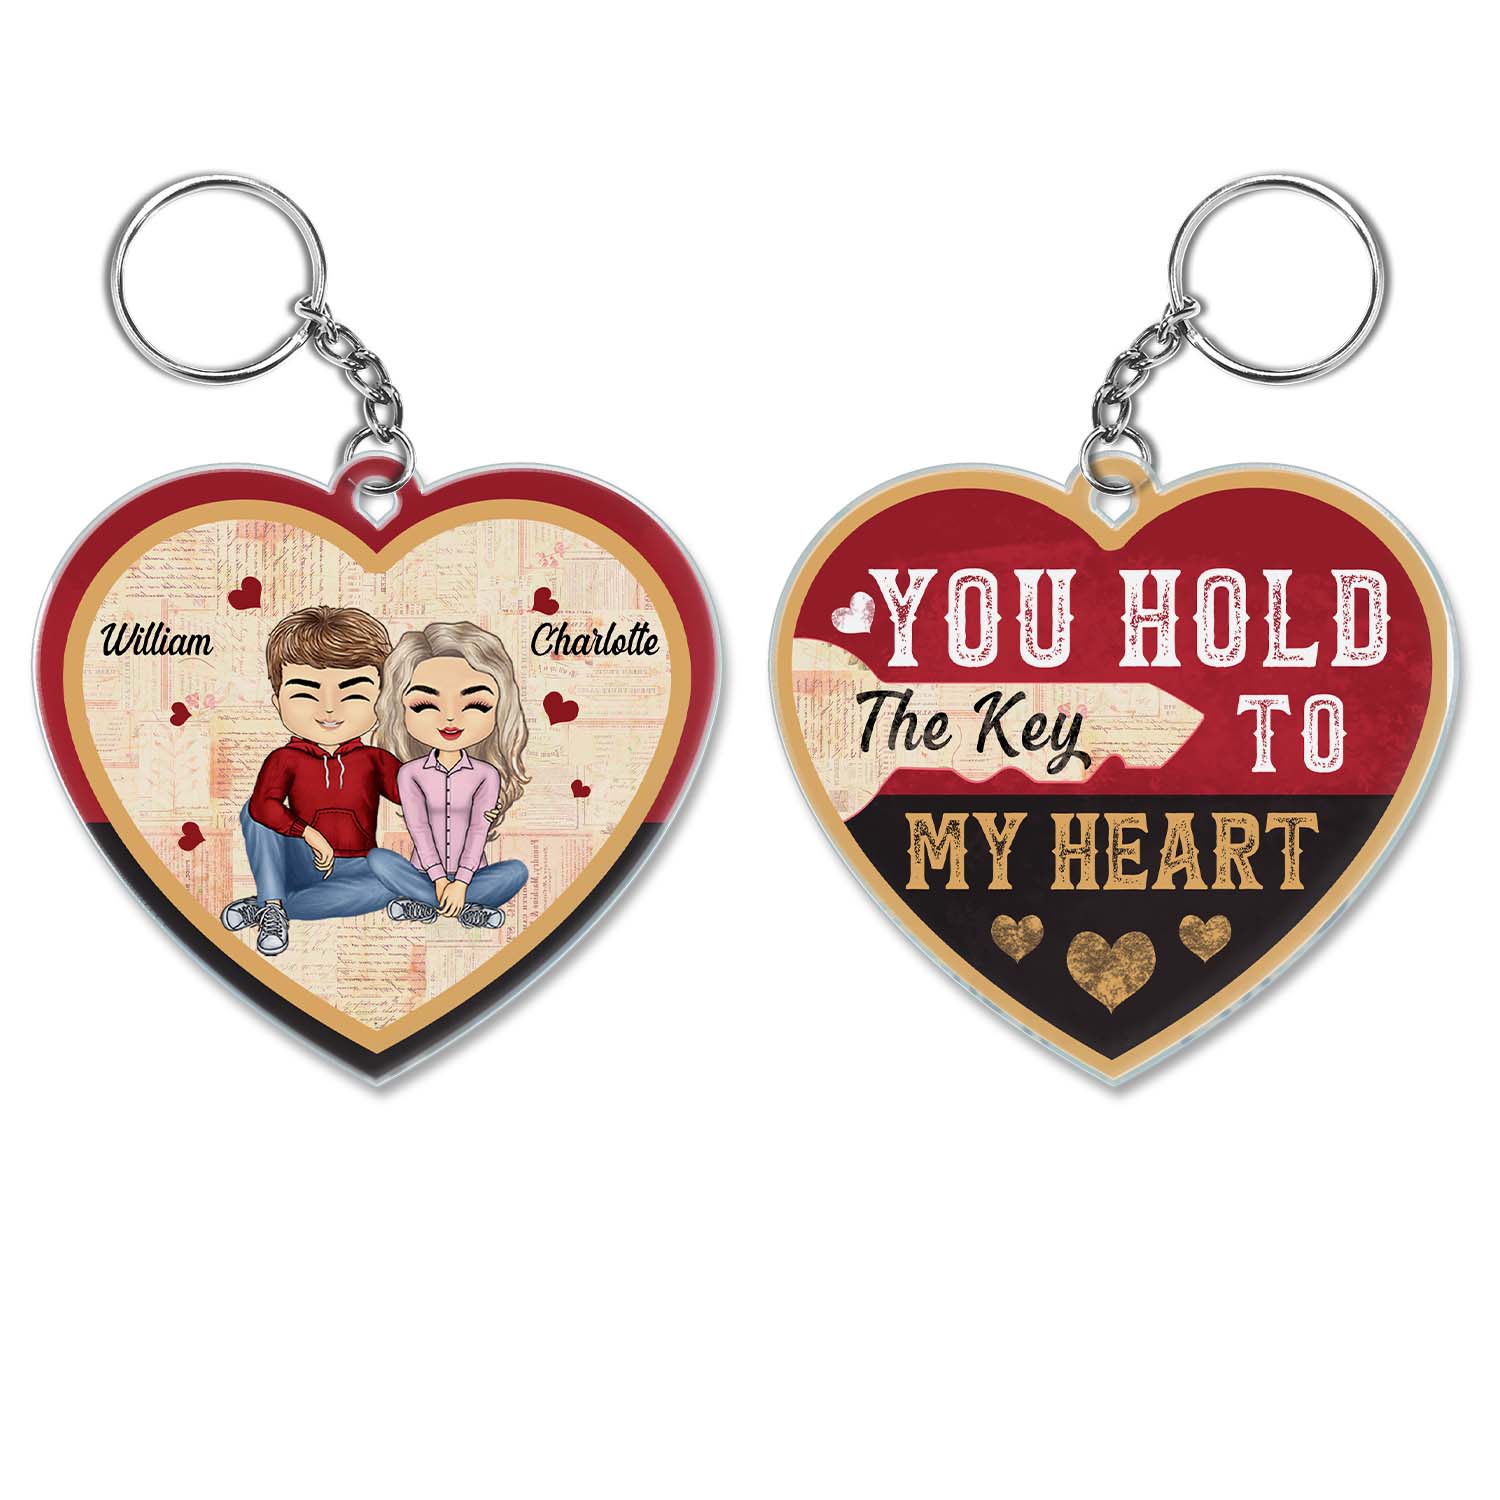 You Hold The Key To My Heart - Anniversary, Birthday Gift For Couples, Spouse, Husband, Wife, Boyfriend, Girlfriend - Personalized Custom Heart Shaped Acrylic Keychain